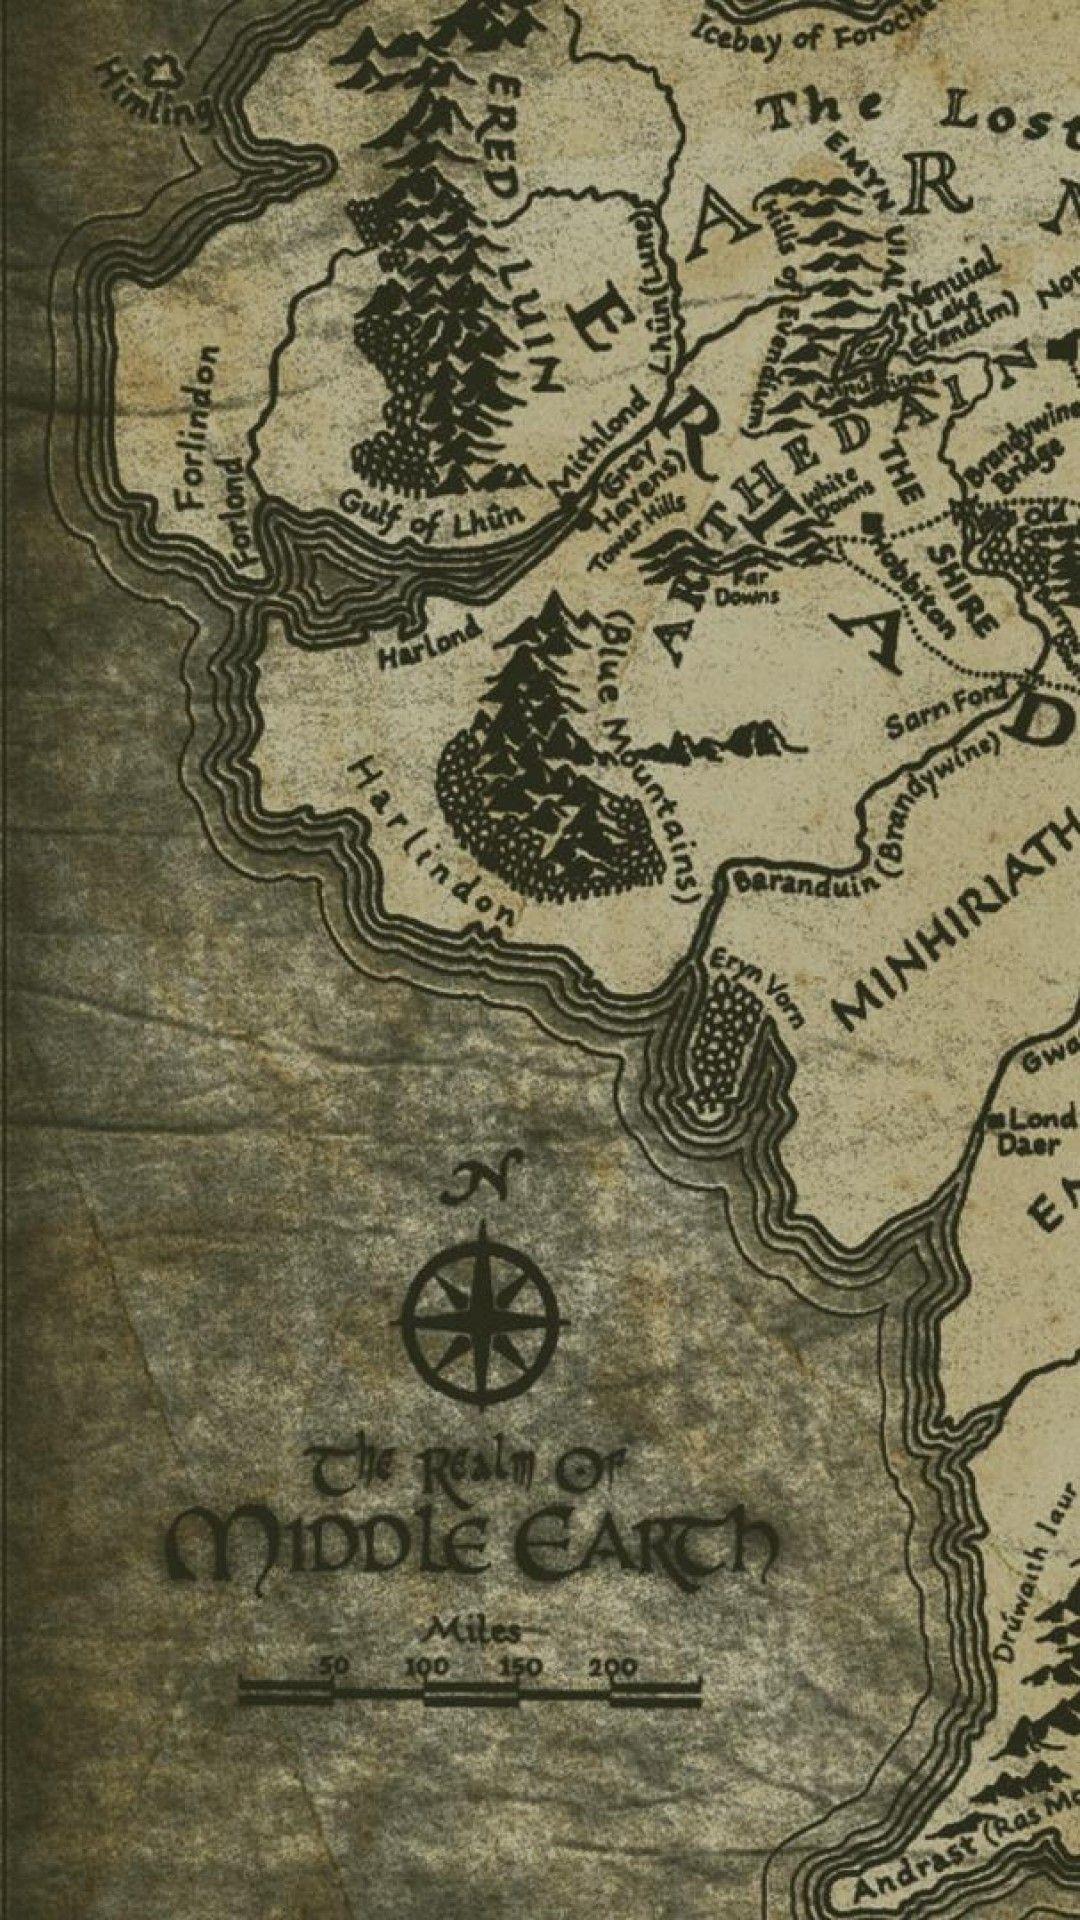 The Lord of the Rings iPhone Wallpaper HD. iPhone Wallpaper. Middle earth map, The hobbit, Lord of the rings